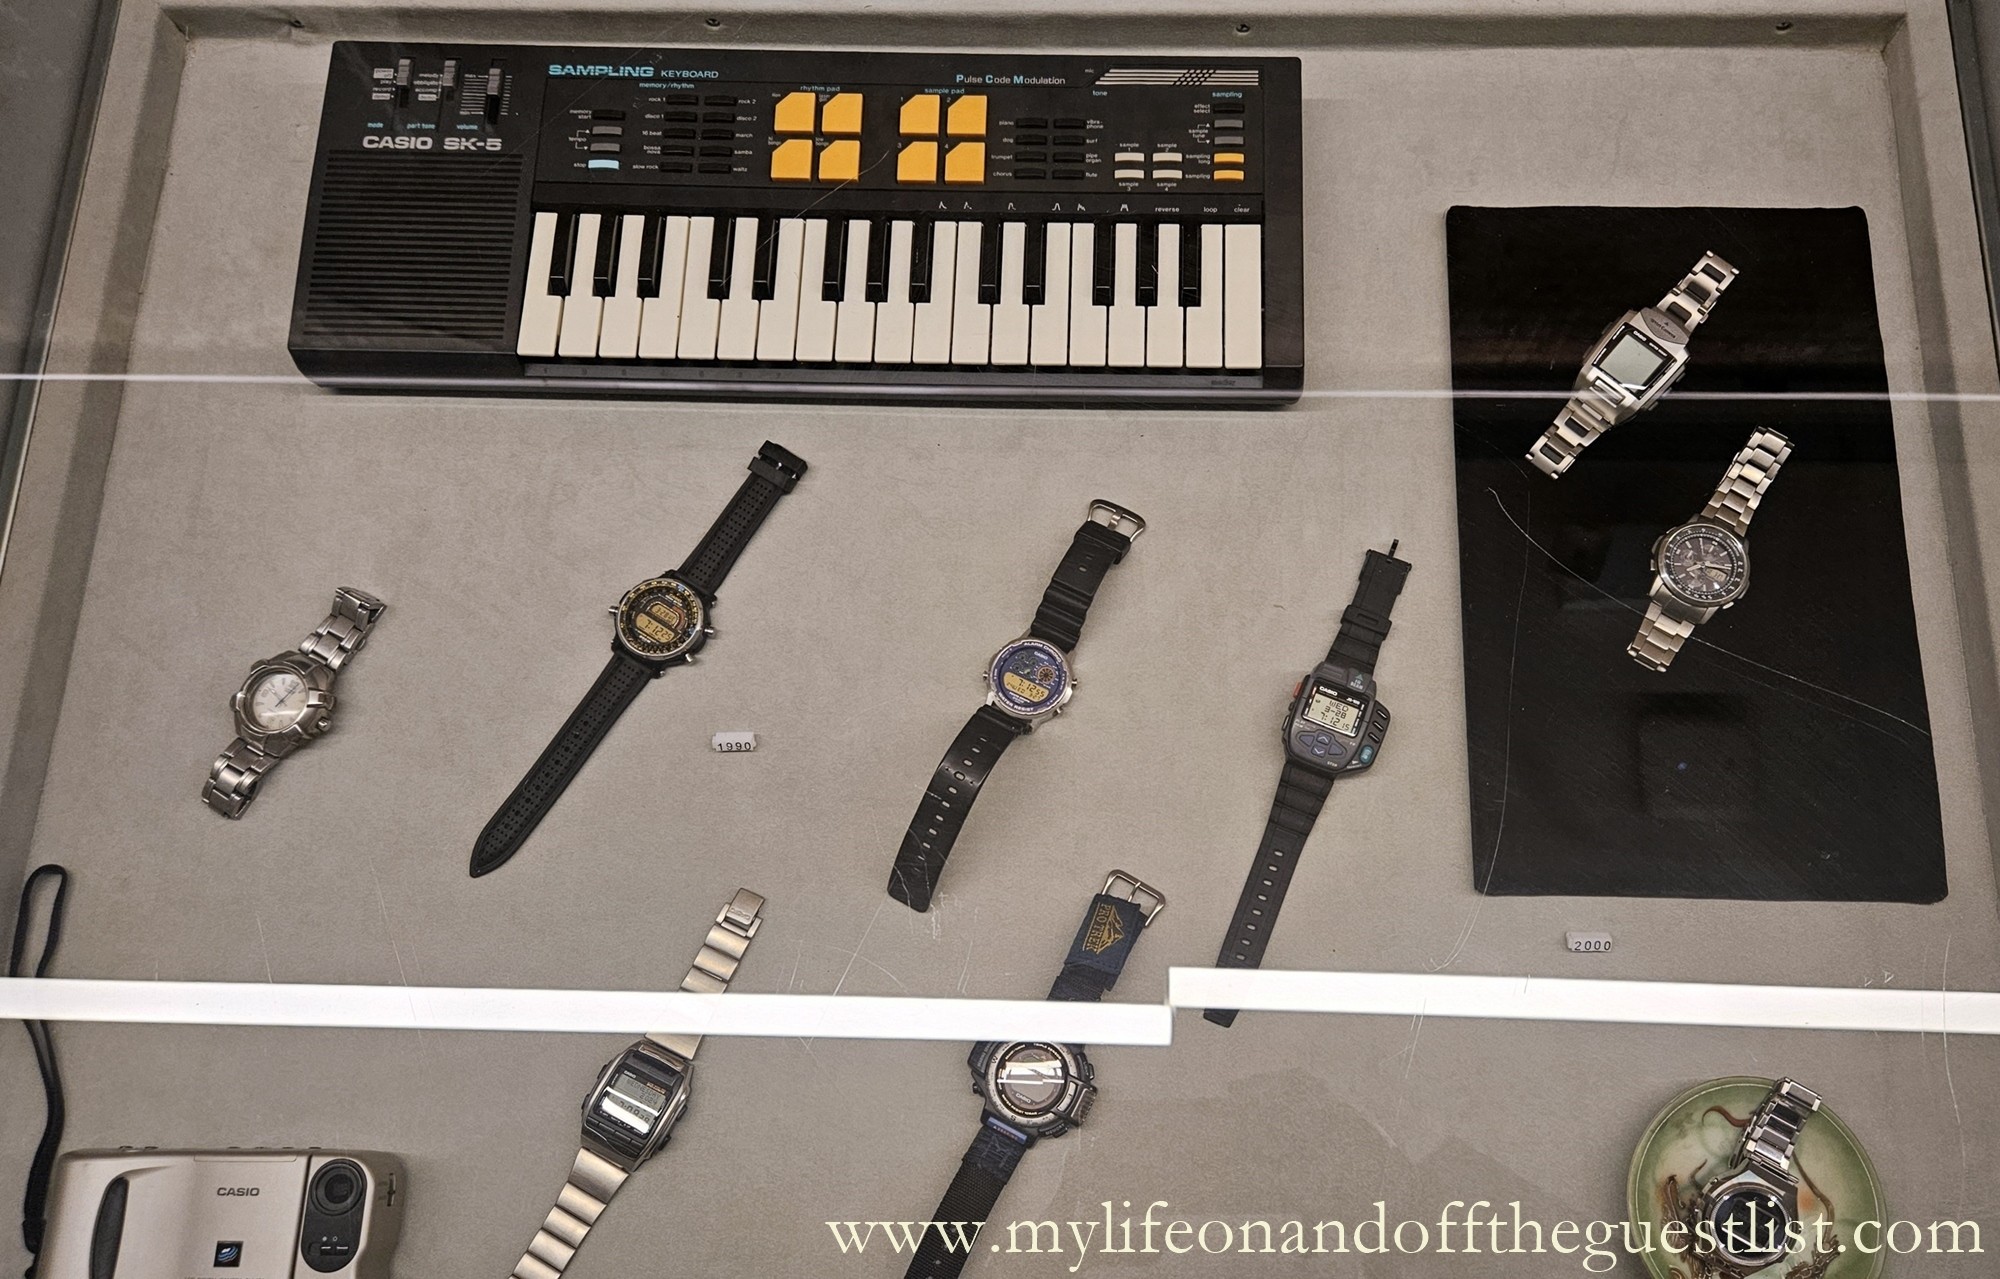 CASIO Celebrates 50 Years with Immersive Gallery Experience